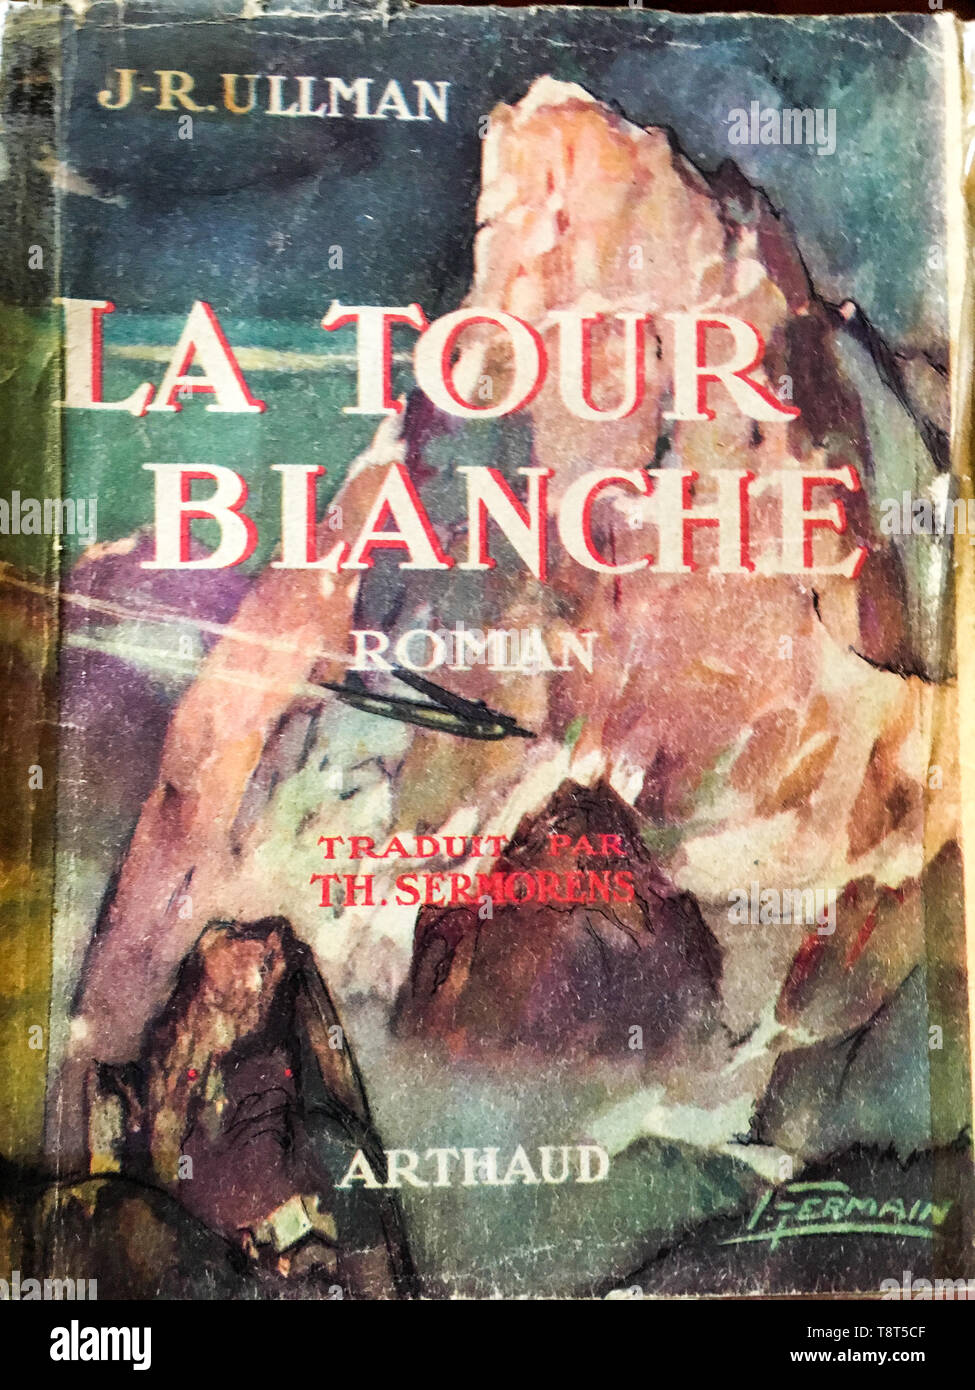 'The white tower' - La Tour Blanche, Old edition cover of J.R Ulman, Lyon, France Stock Photo